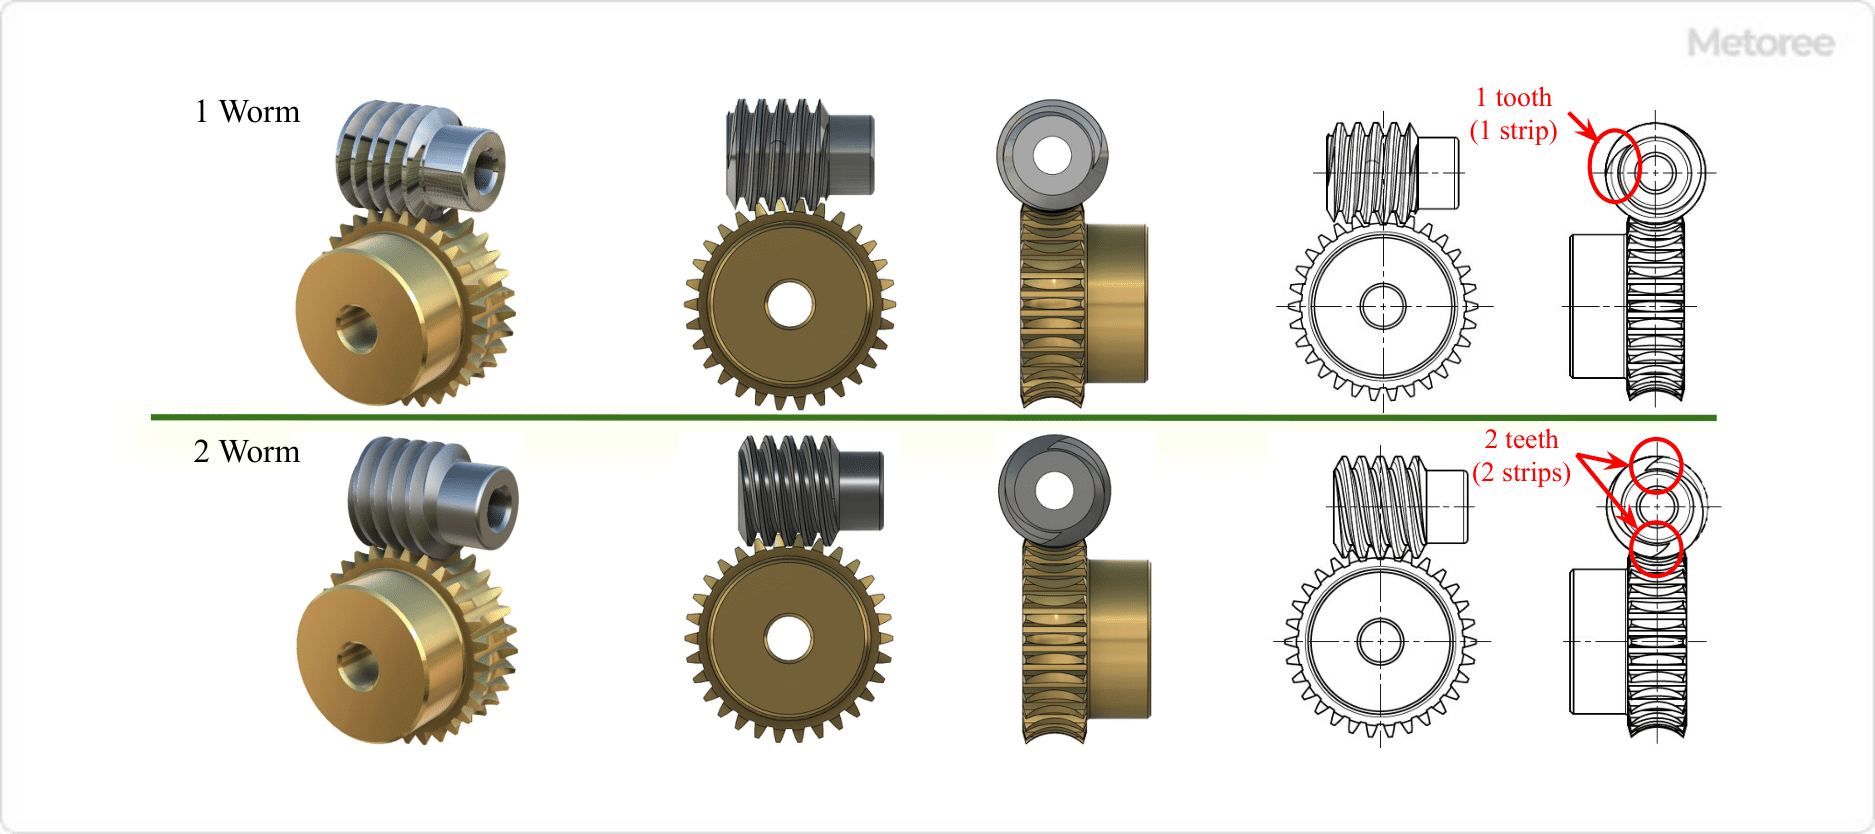 Figure 5. 1- and 2-strip worm gear